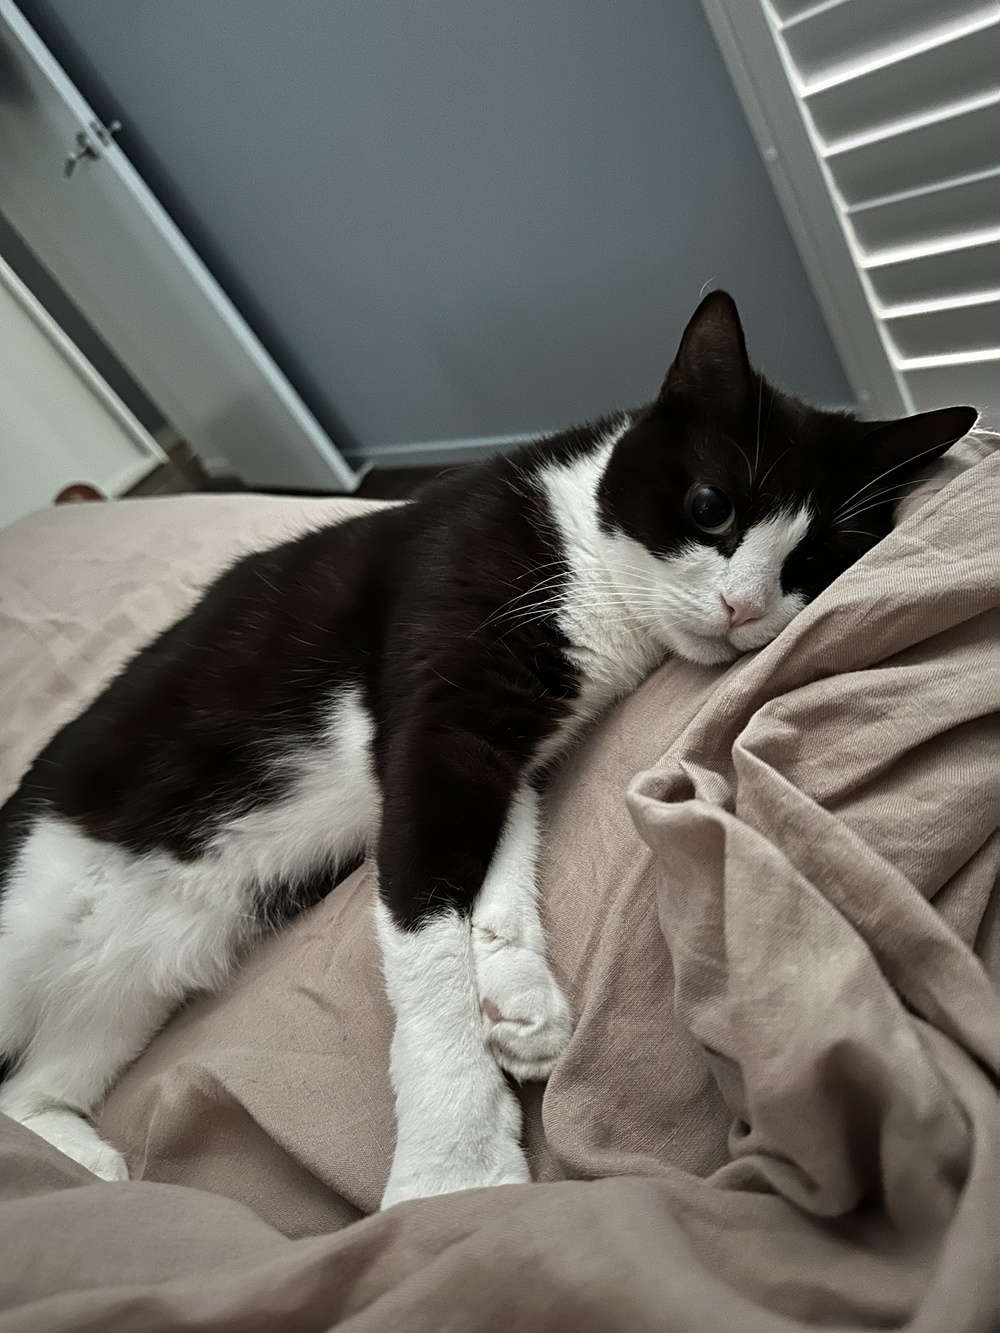 A black and white cat called Ali is stretched out on the side of a bed looking at the camera. The ends of her legs, stomach, chin and nose are white. The rest of her body is black.